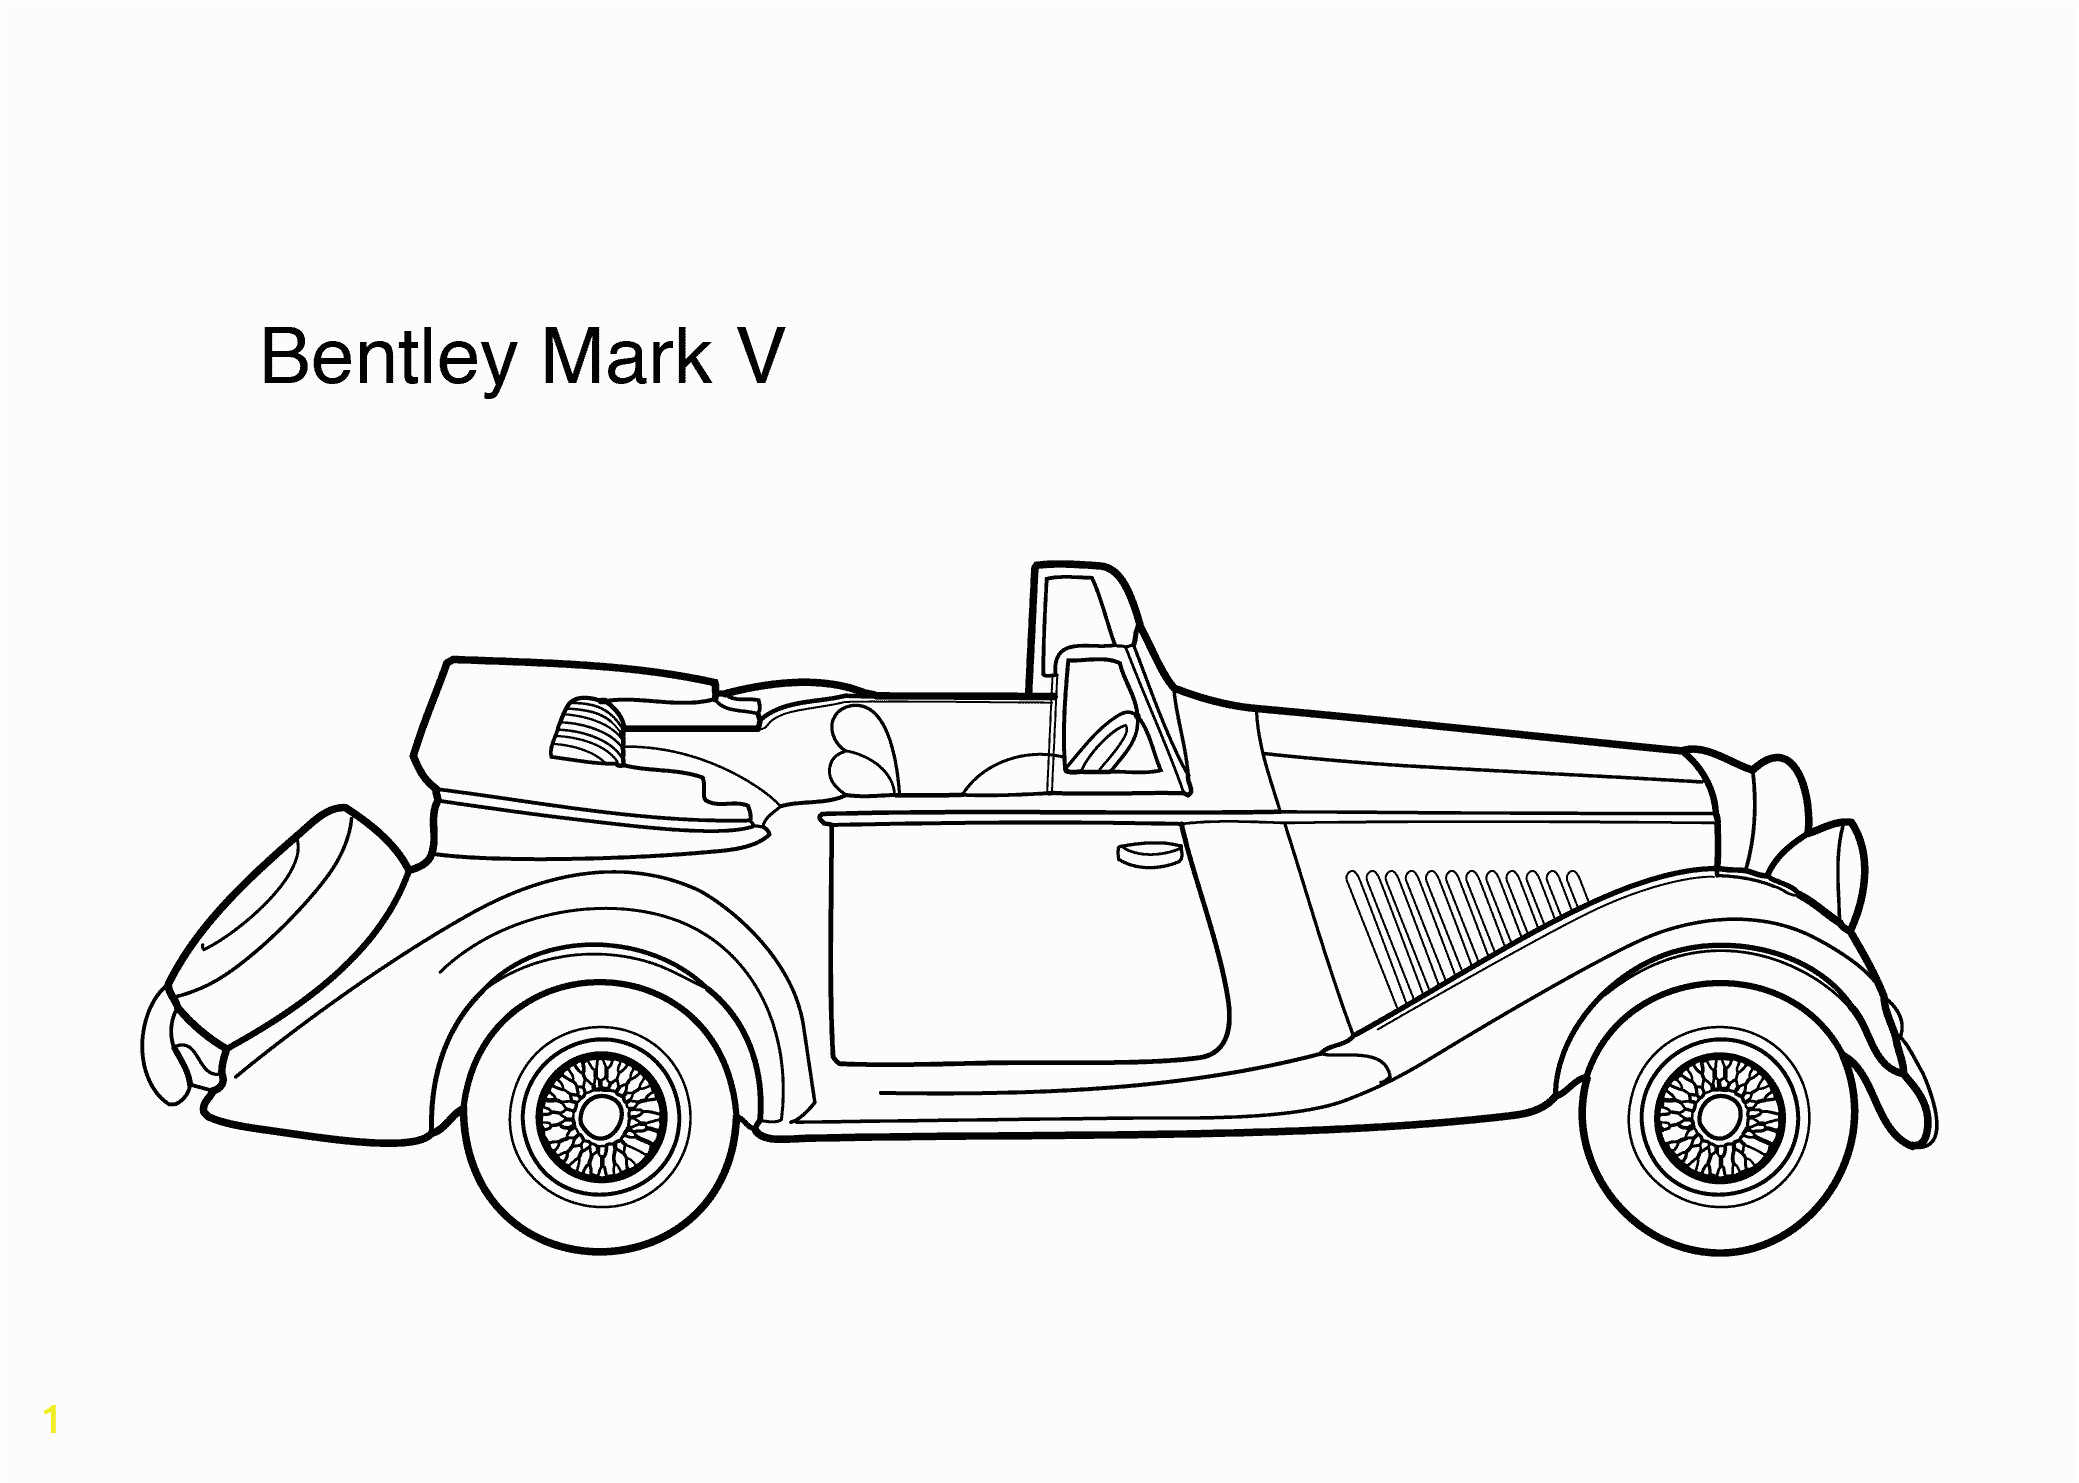 Printable Car Coloring Pages Super Car Bentley Mark 5 Coloring Page for Kids Printable